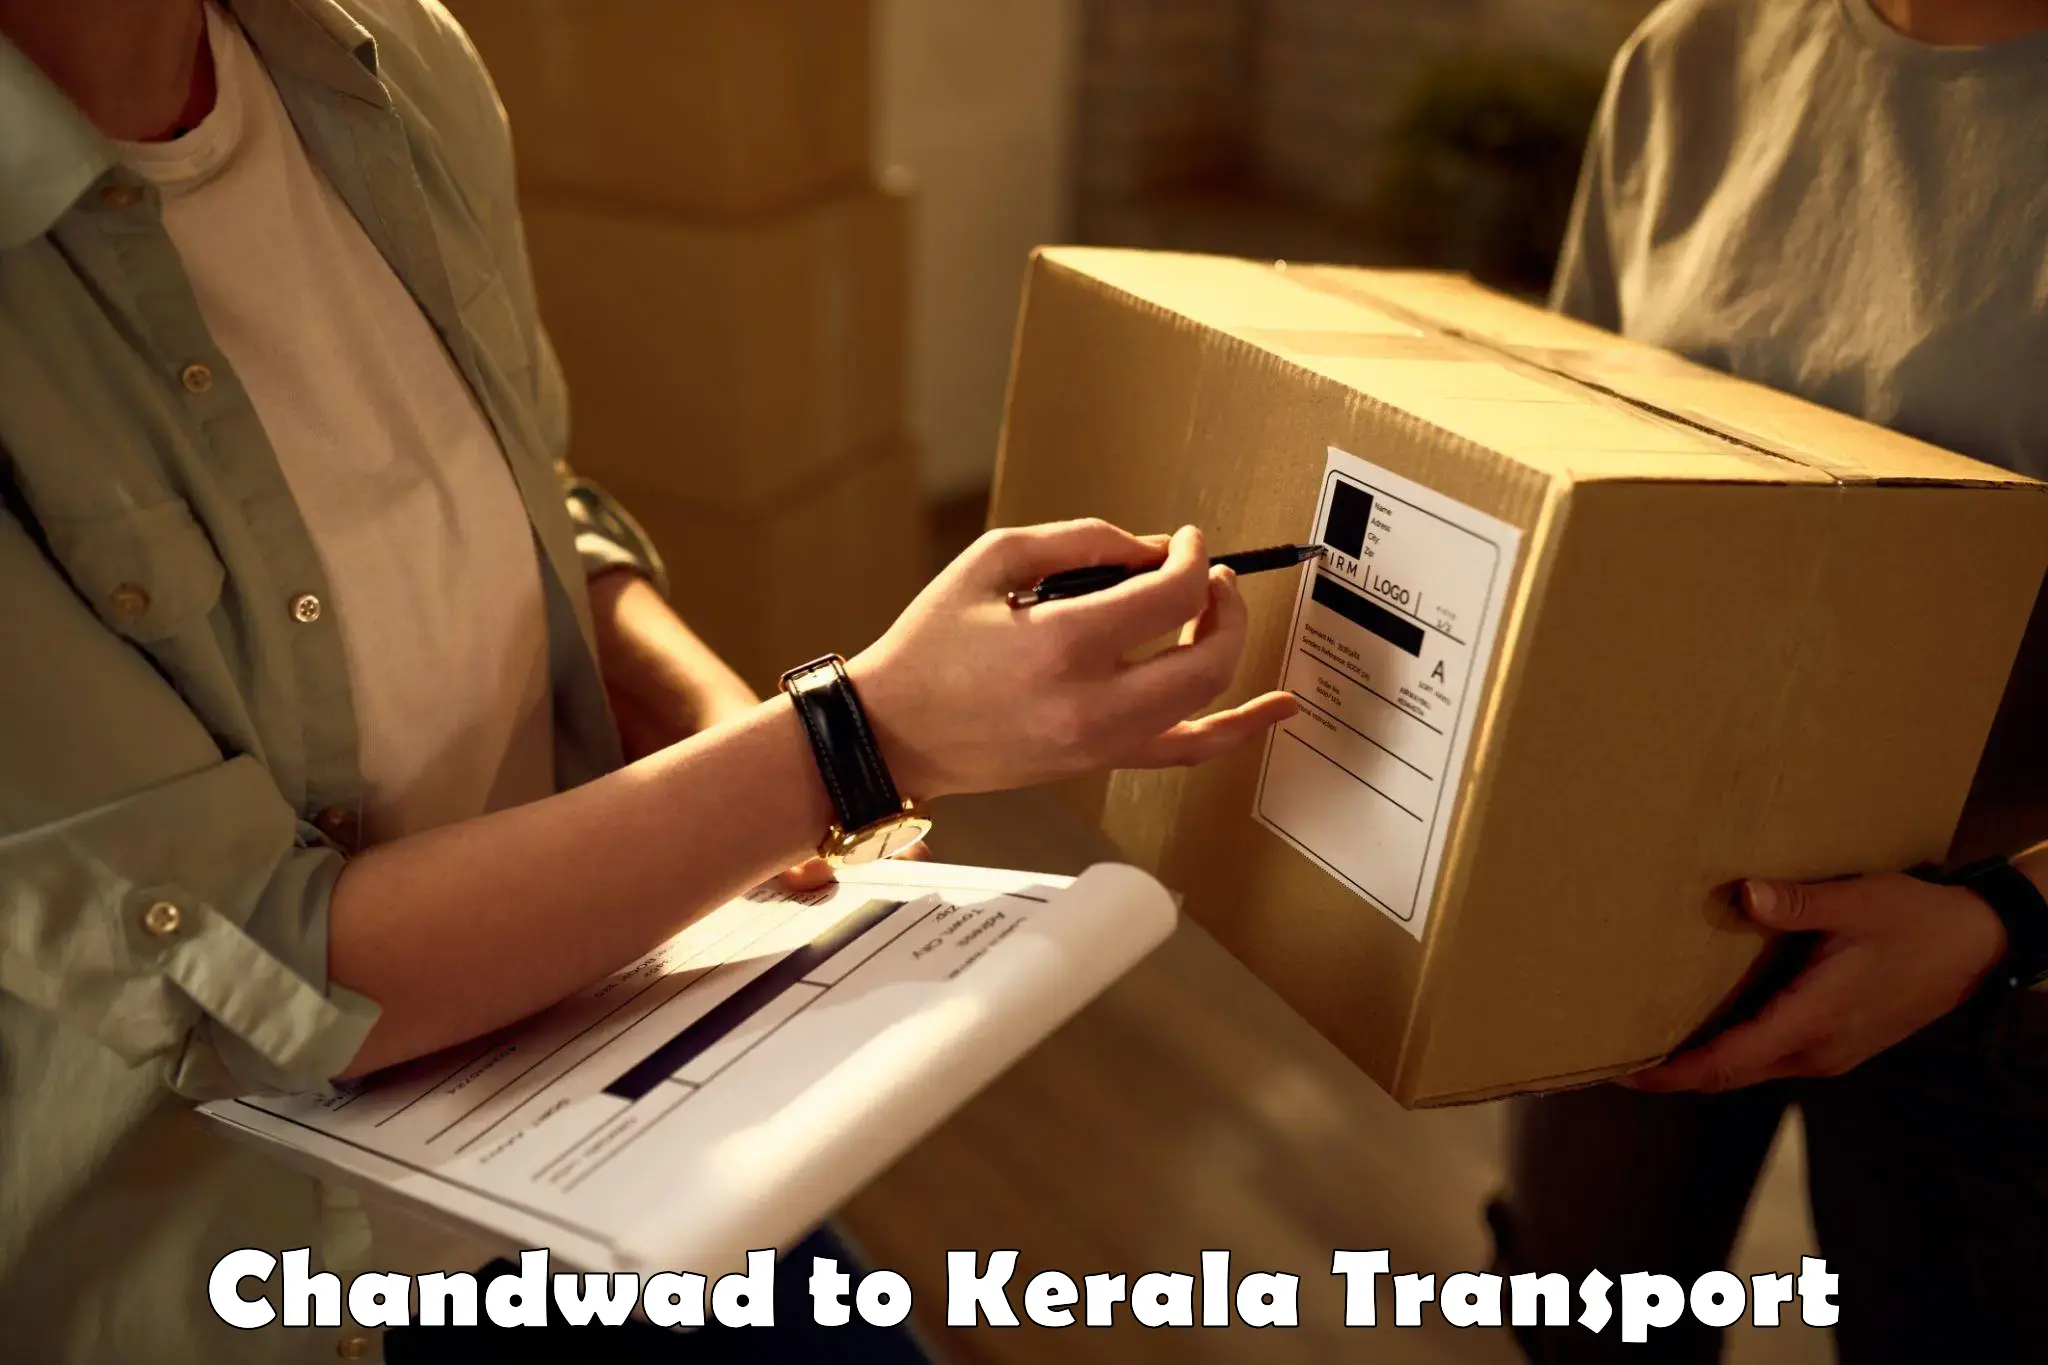 Container transport service Chandwad to Ernakulam